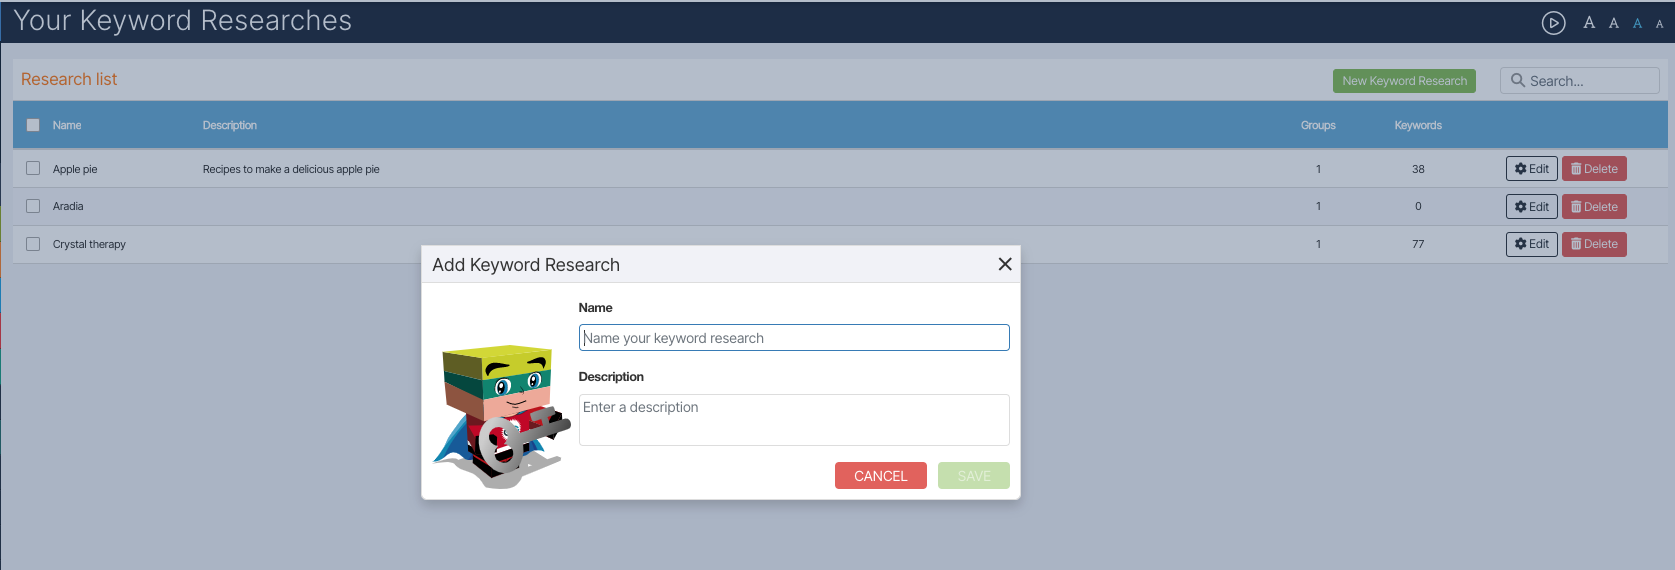 Your keyword researches: organize and manage your data